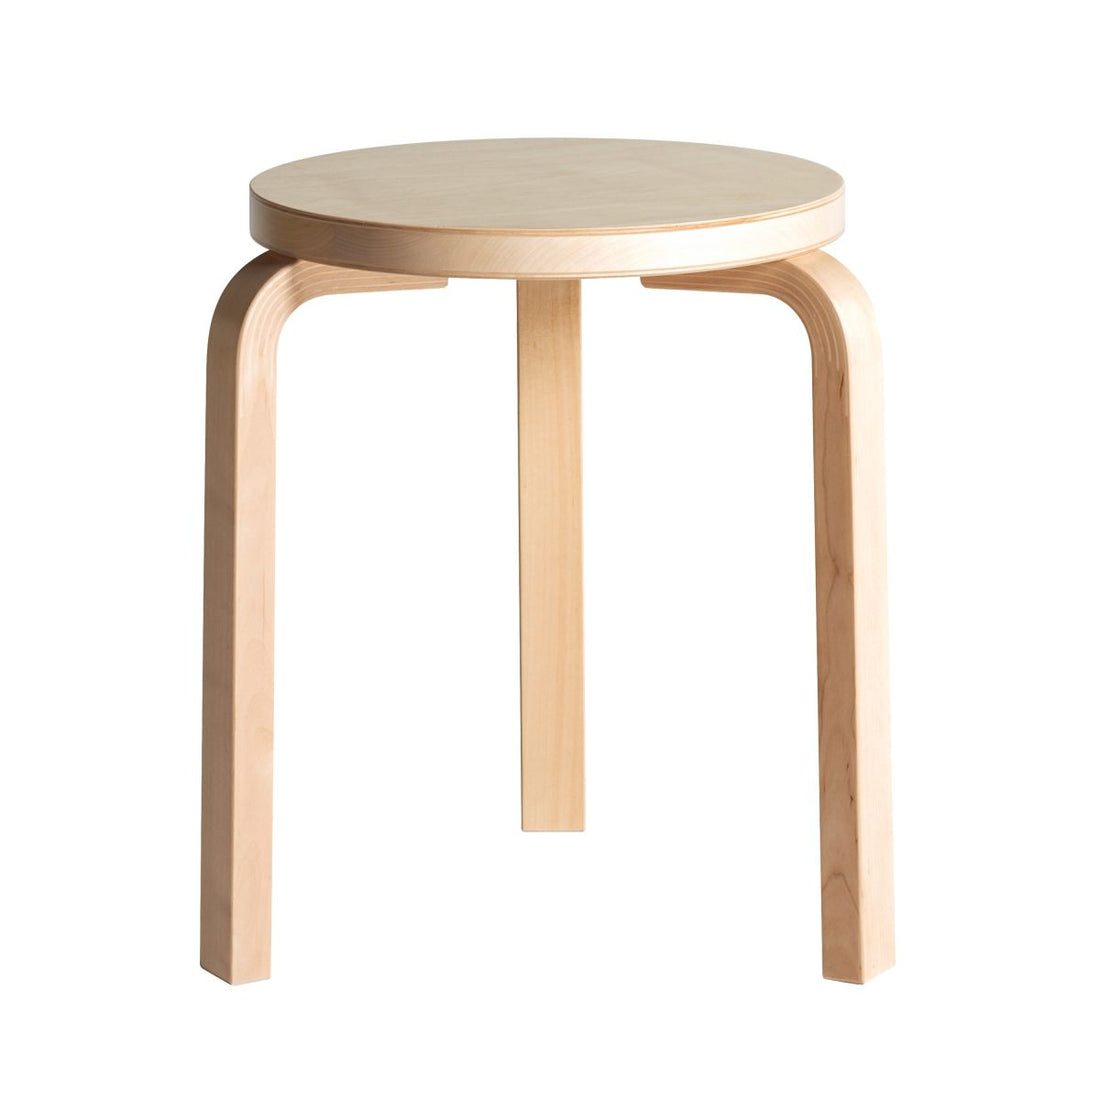 Design classics: Discover the 60 stool and its creator.